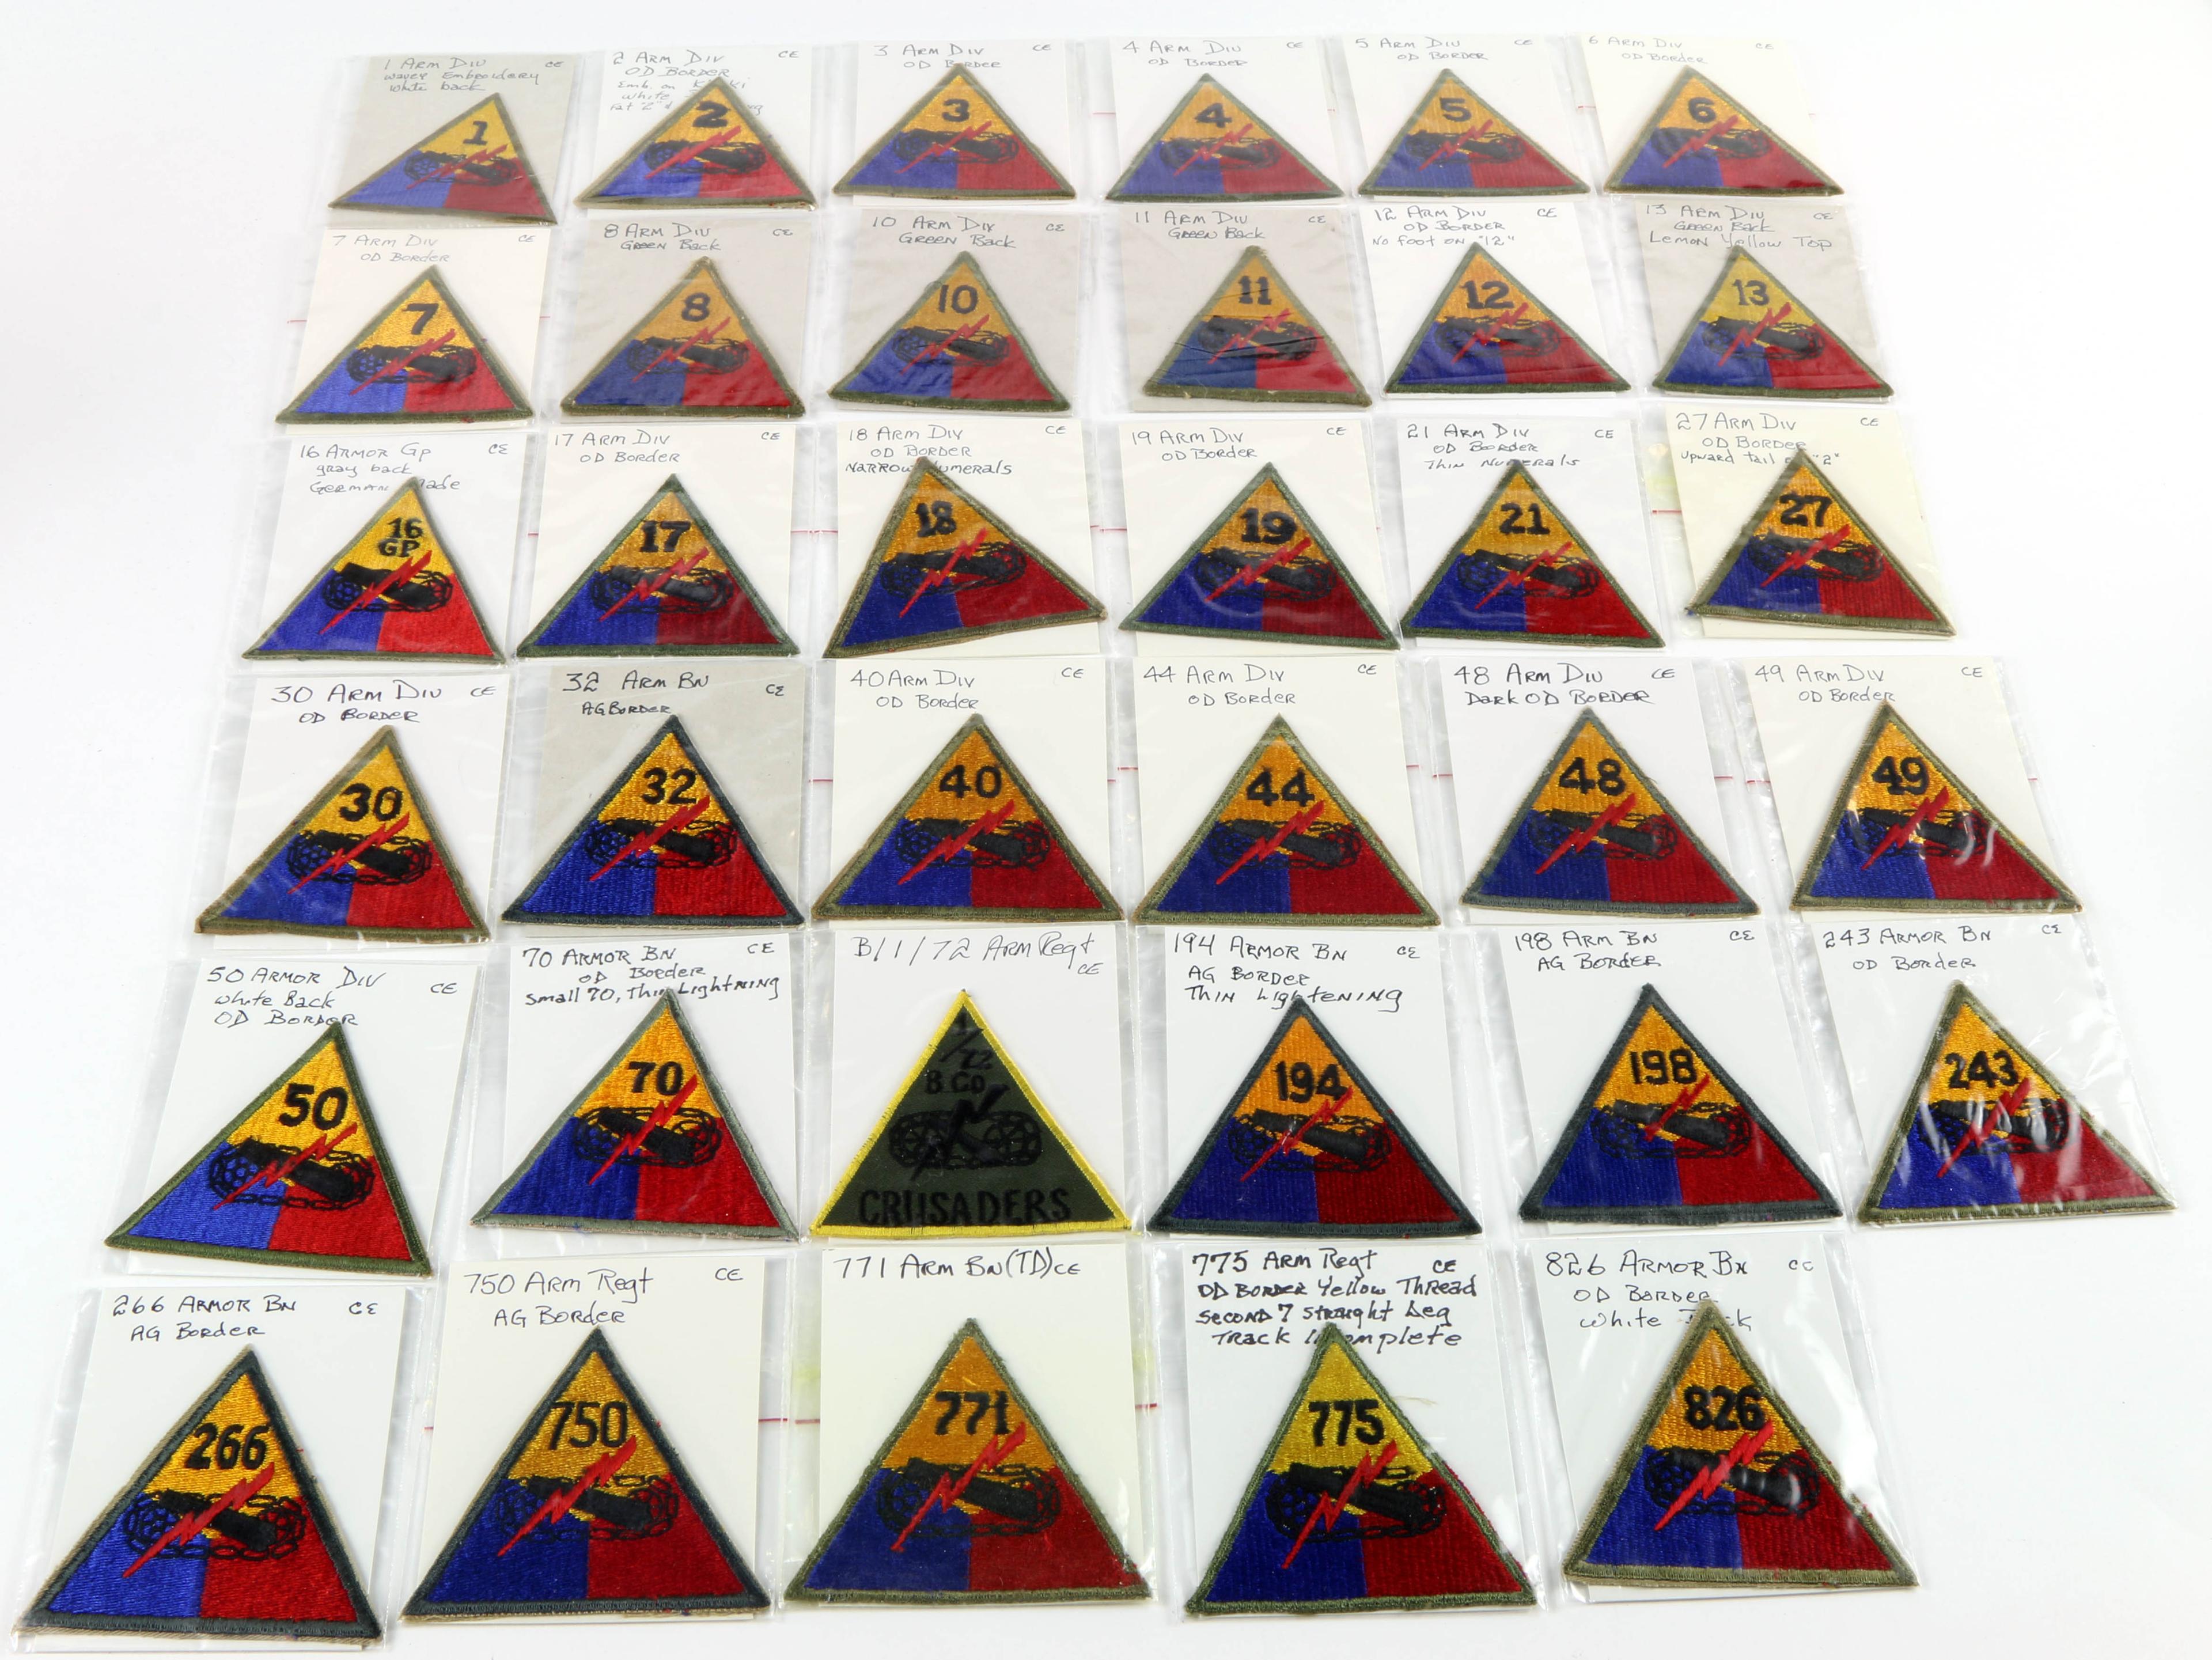 U.S. Army Armored Division Patches (35)